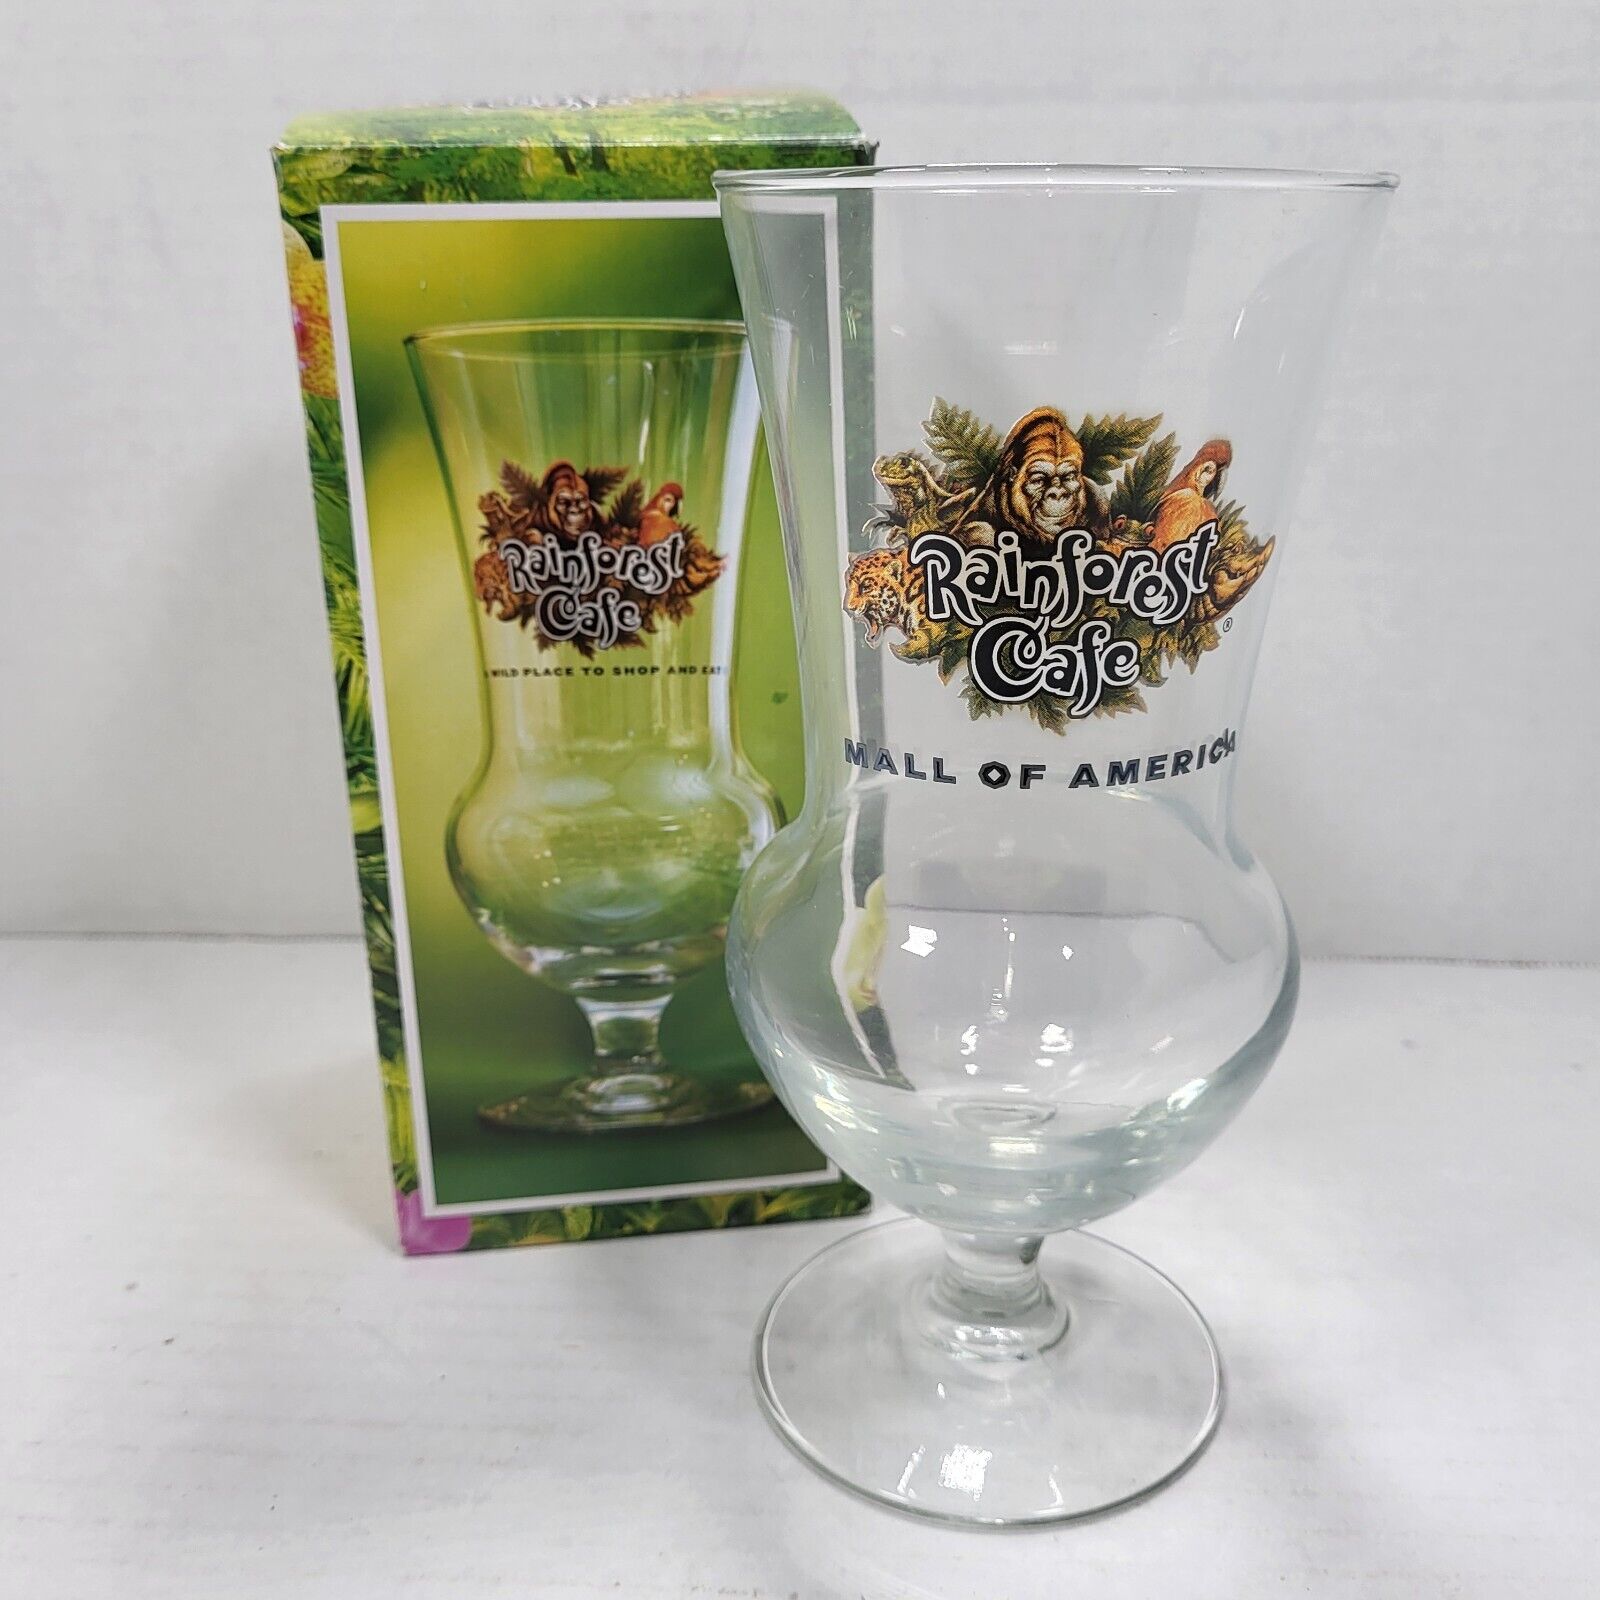 Rainforest Cafe Mall of America Souvenir Collectible Glass in Box